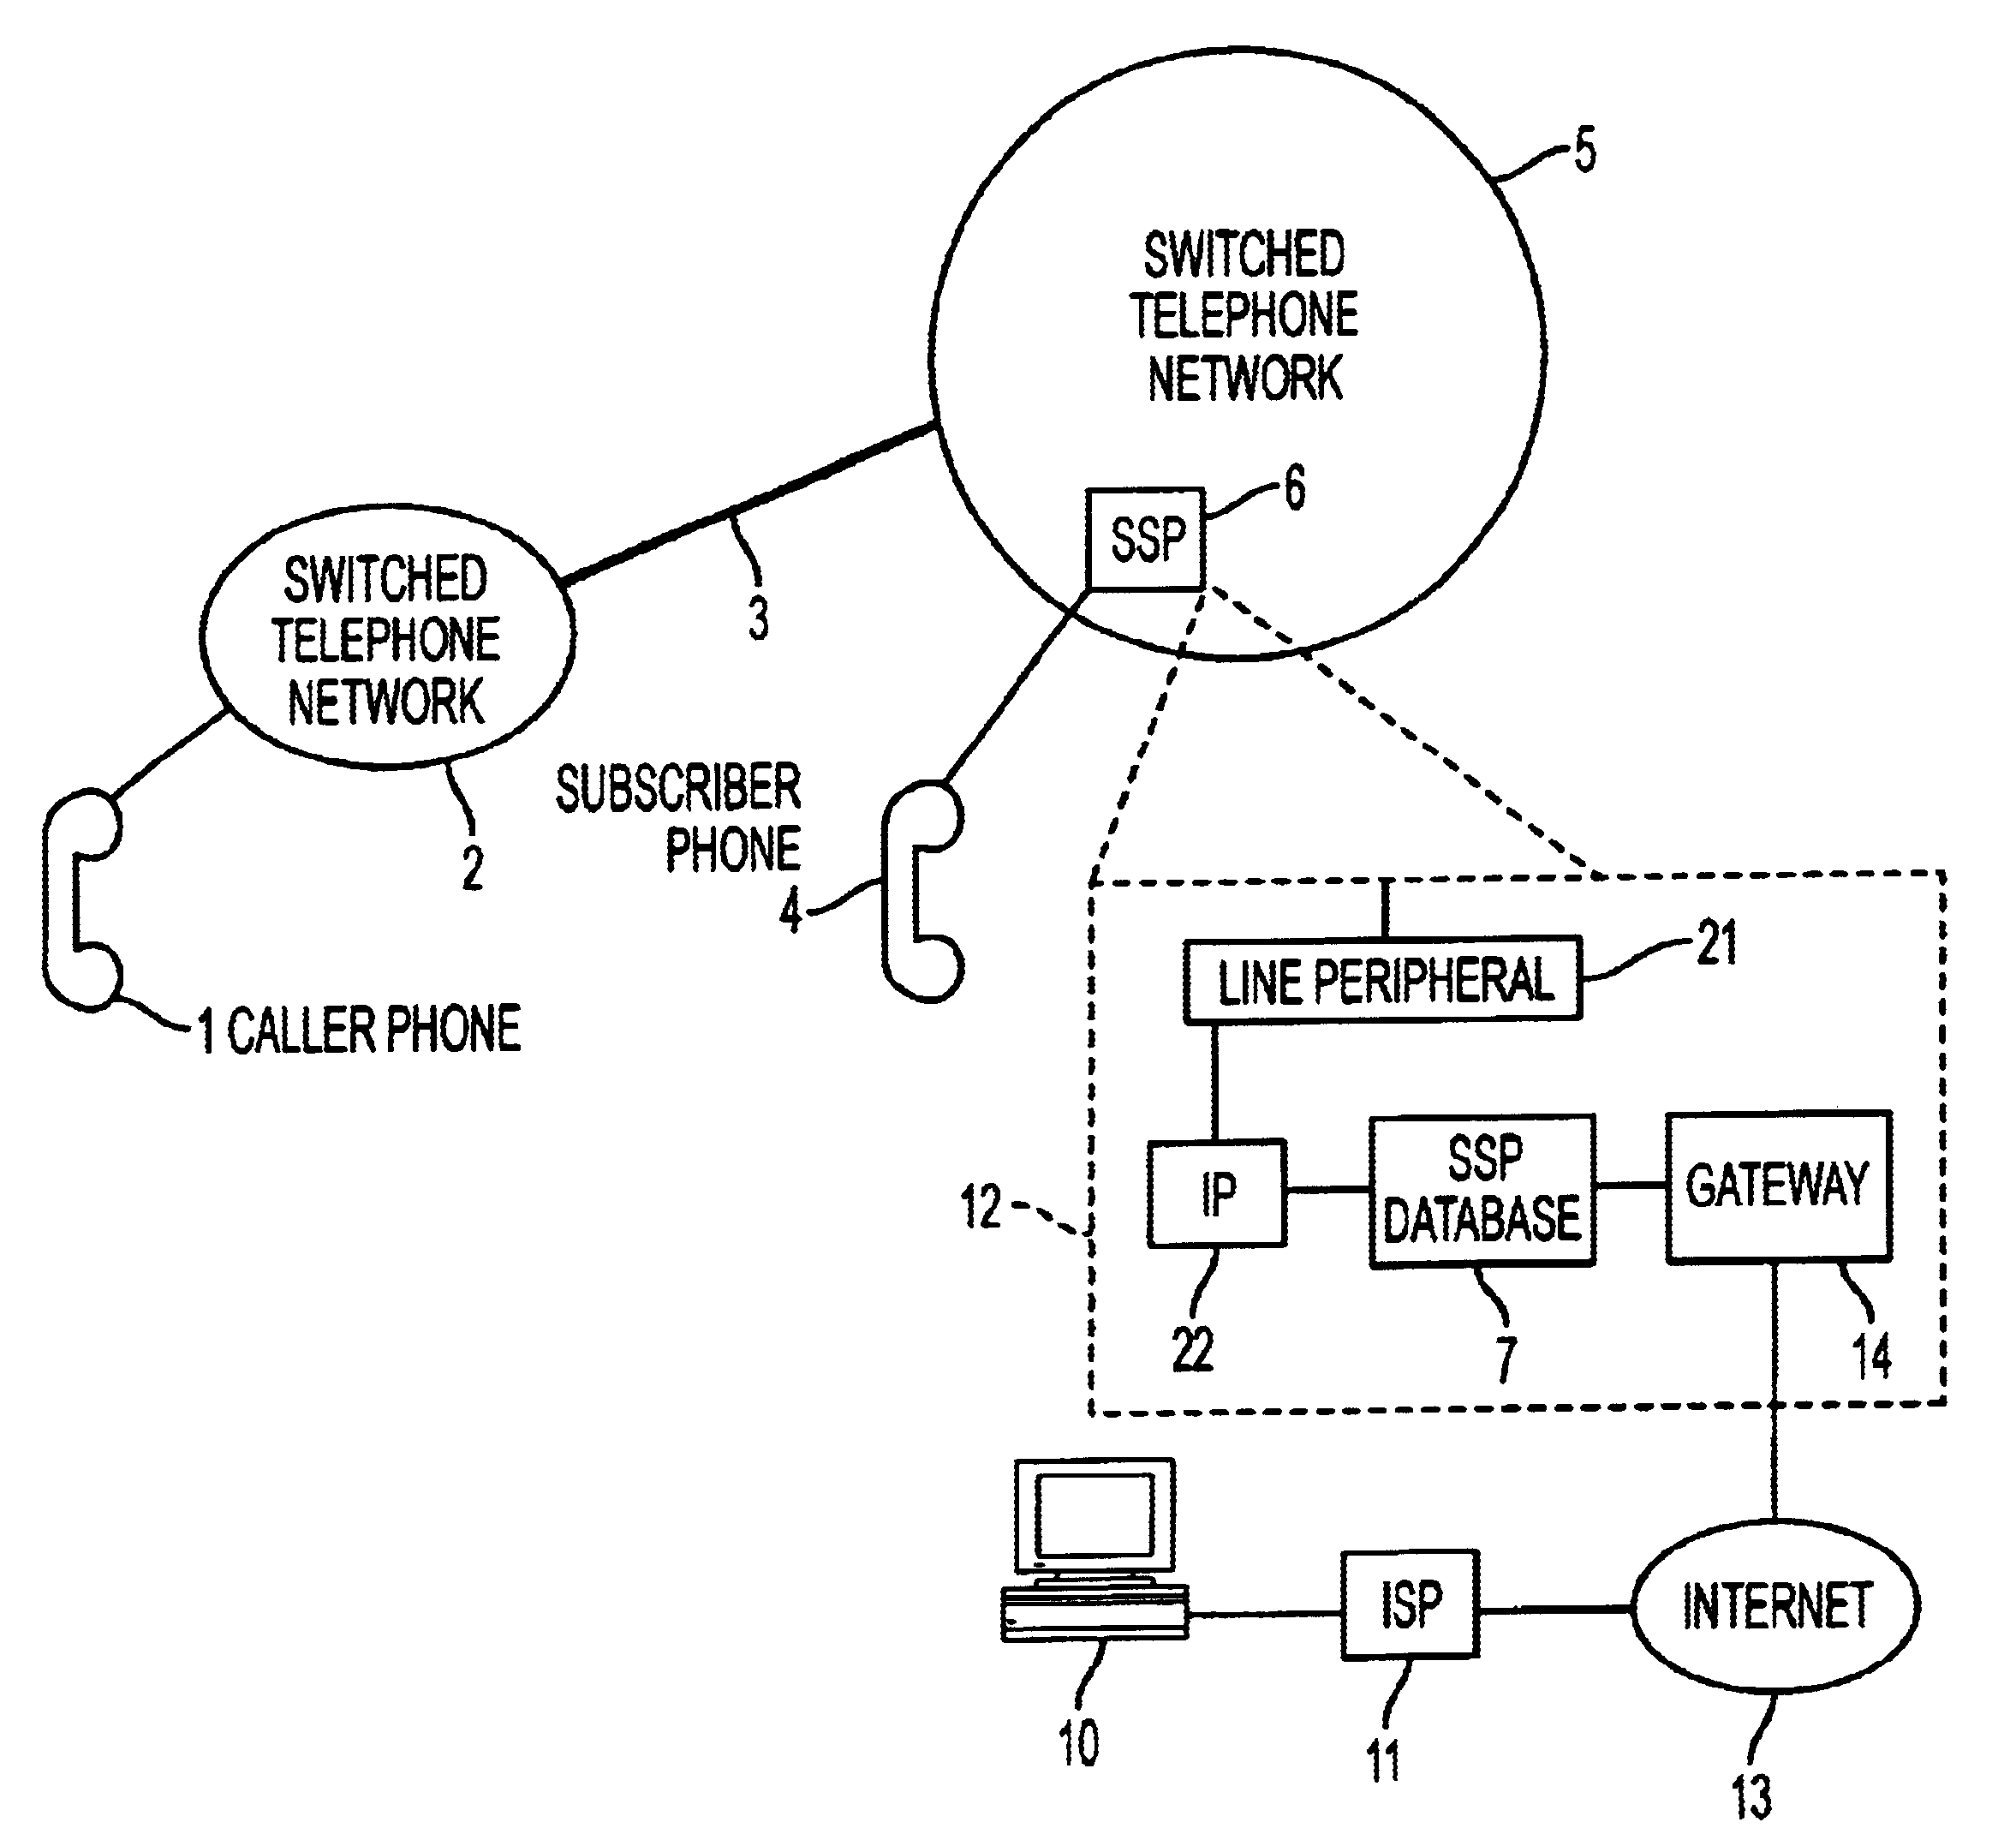 Remote caller identification telephone system and method with internet retrieval